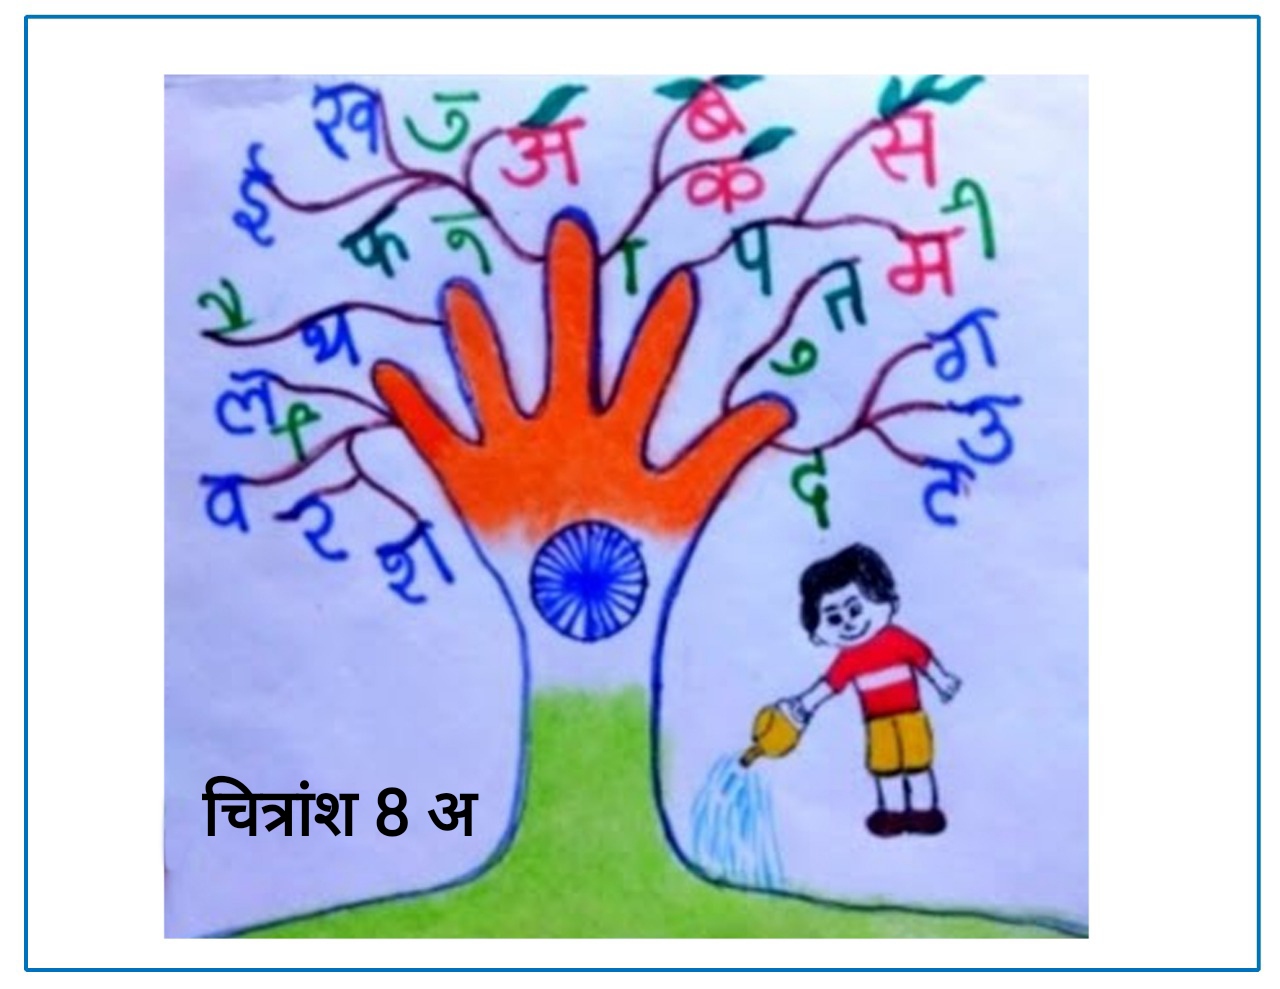 Hindi diwas poster drawing by Drawwithpassion - YouTube